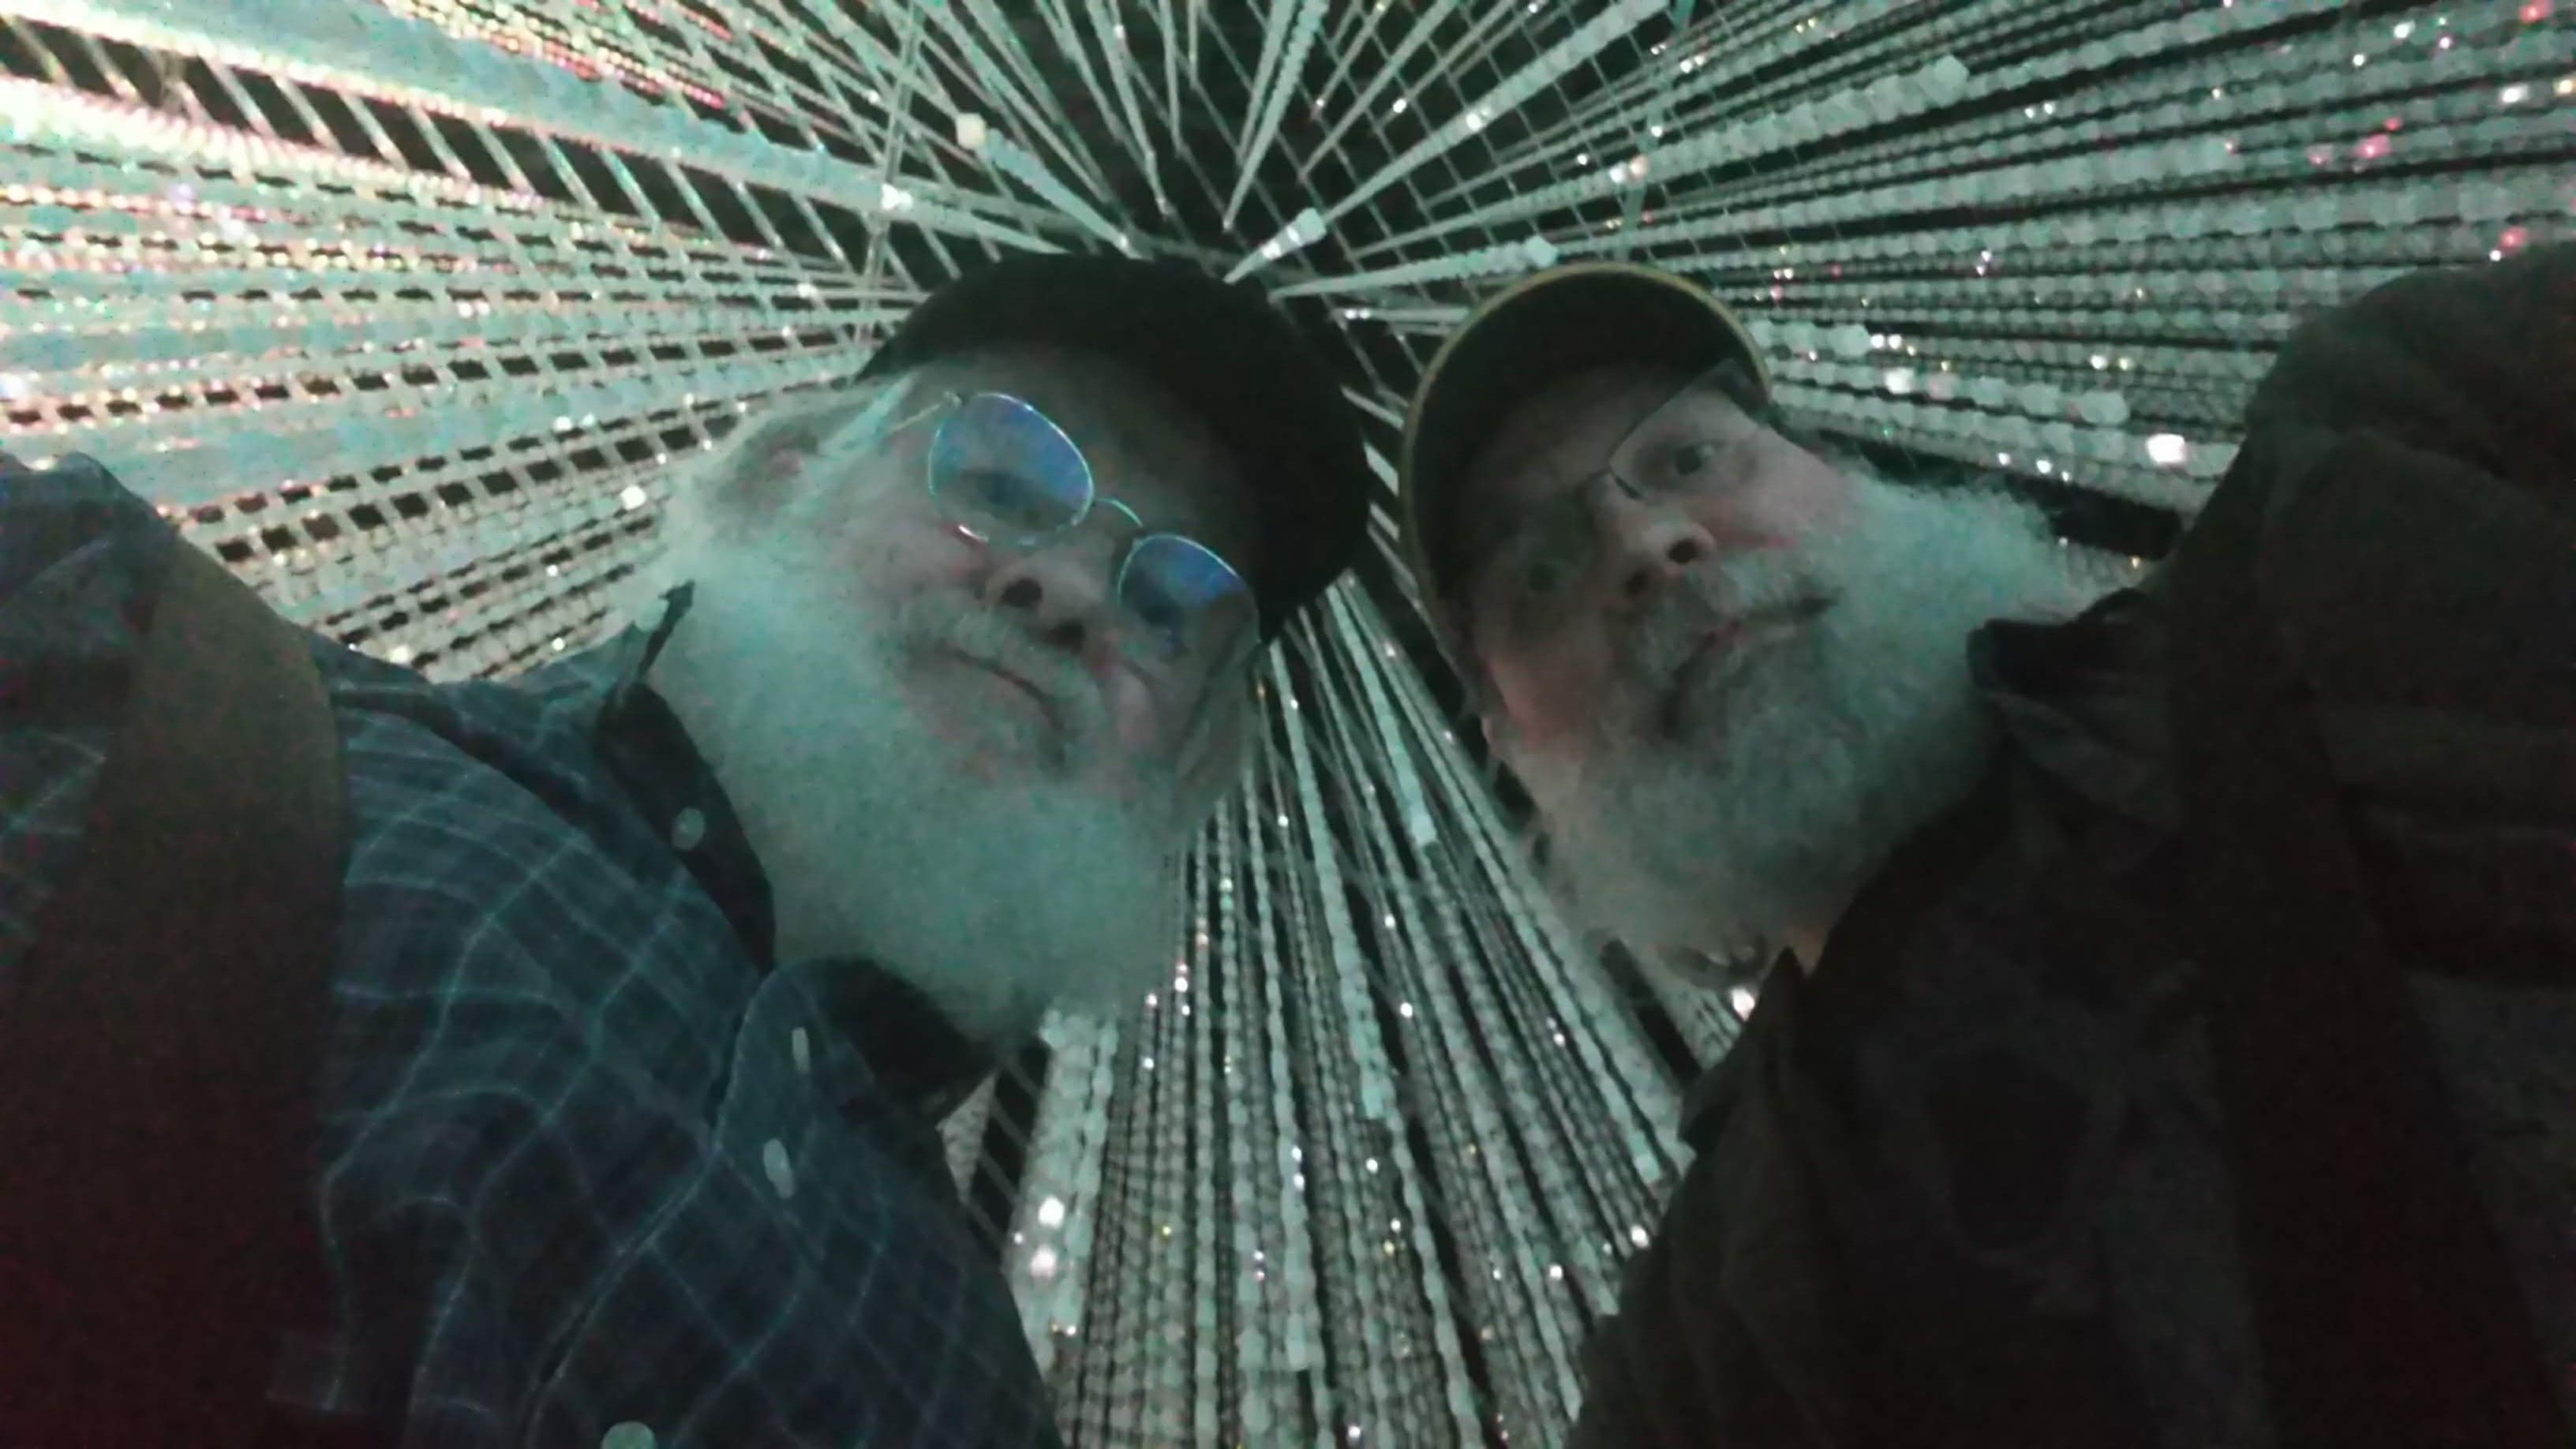 chris and earl look down at the camera the mirrored ceiling above them reflecting white lights into infinity